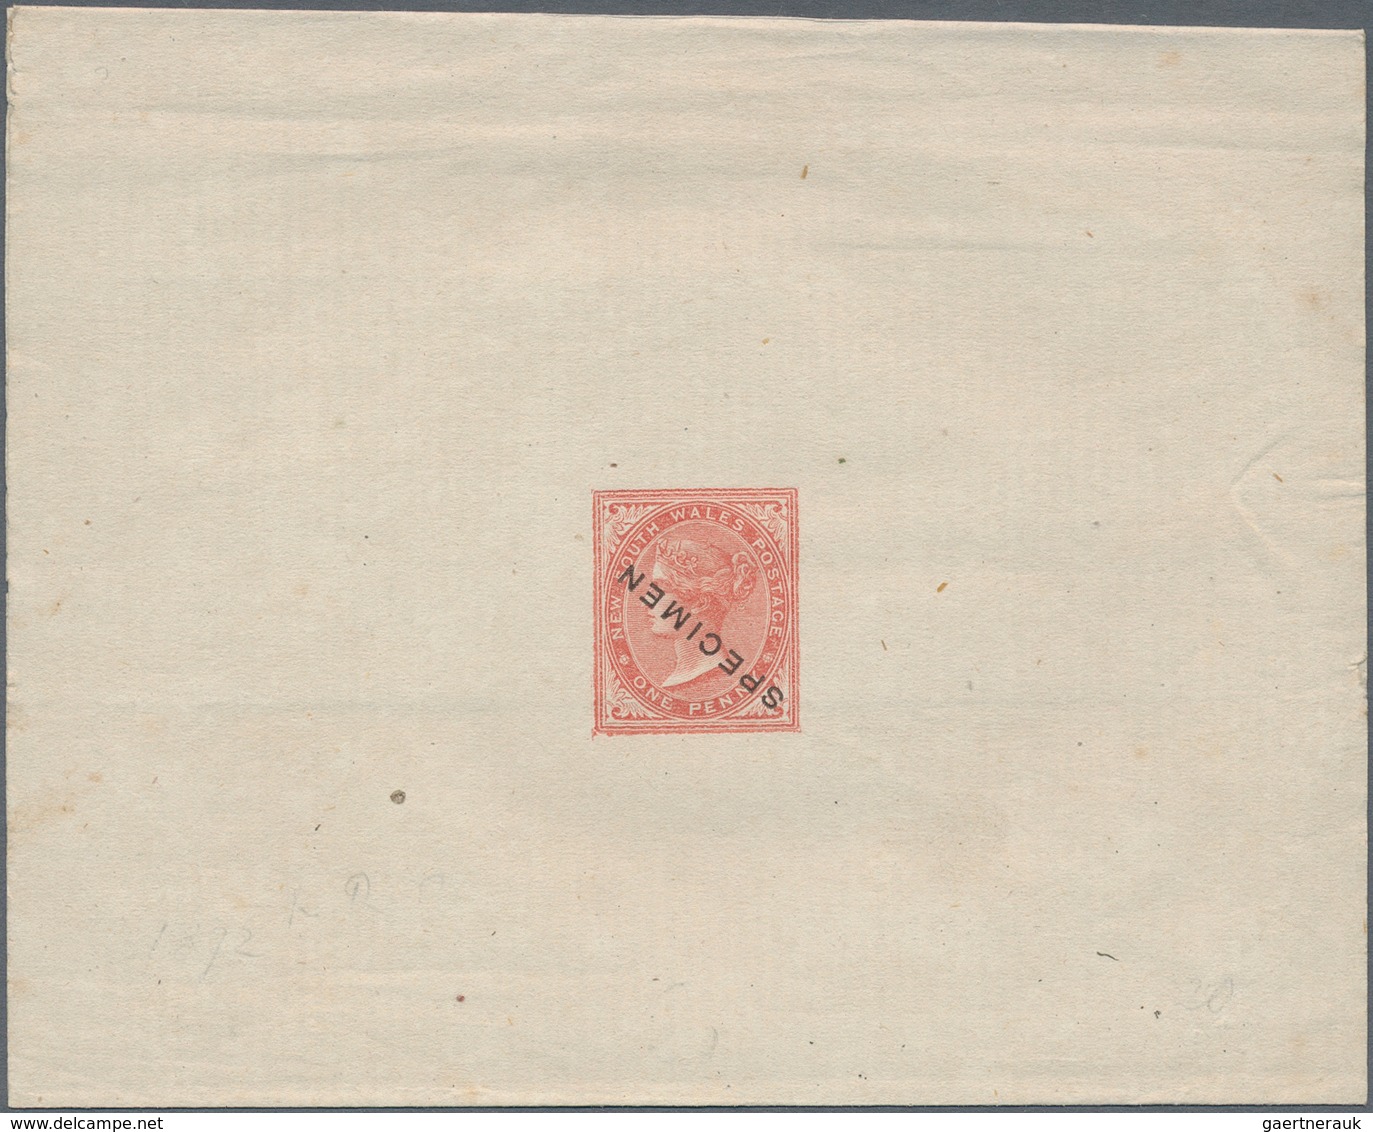 Neusüdwales: 1865/1910 (ca.), POSTAL STATIONERY: accumulation with about 220 mostly different postal